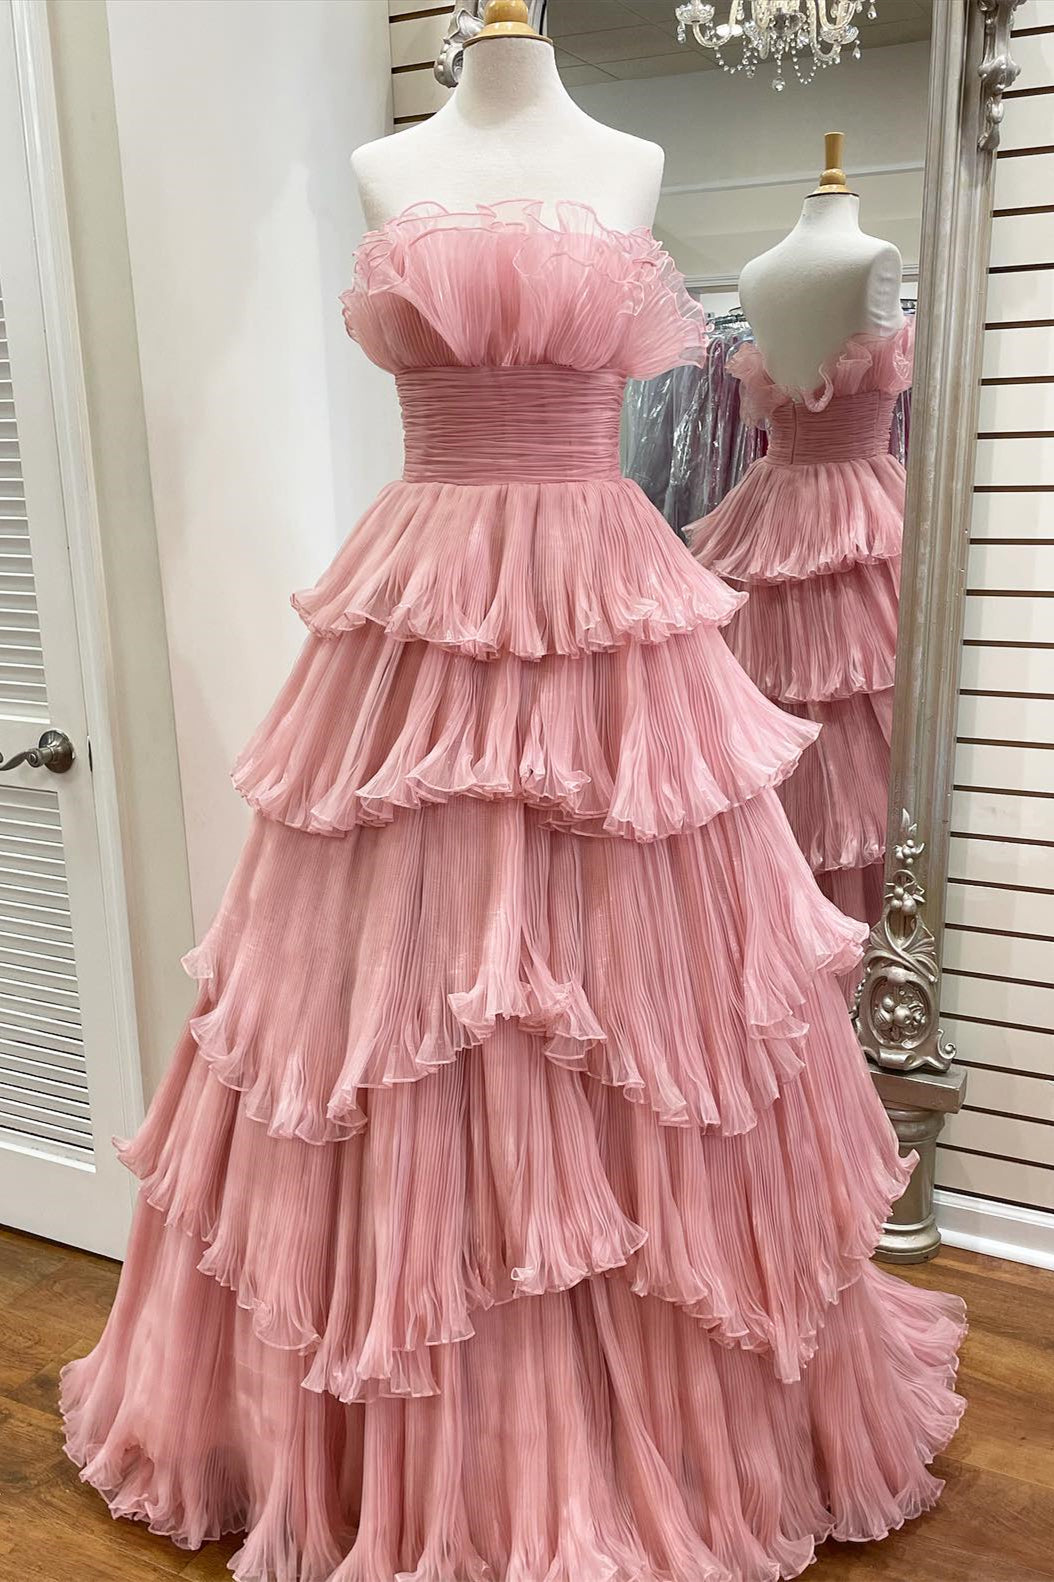 Ruffled & Tiered Pink Tulle Long Sleeve Prom Dress - Xdressy